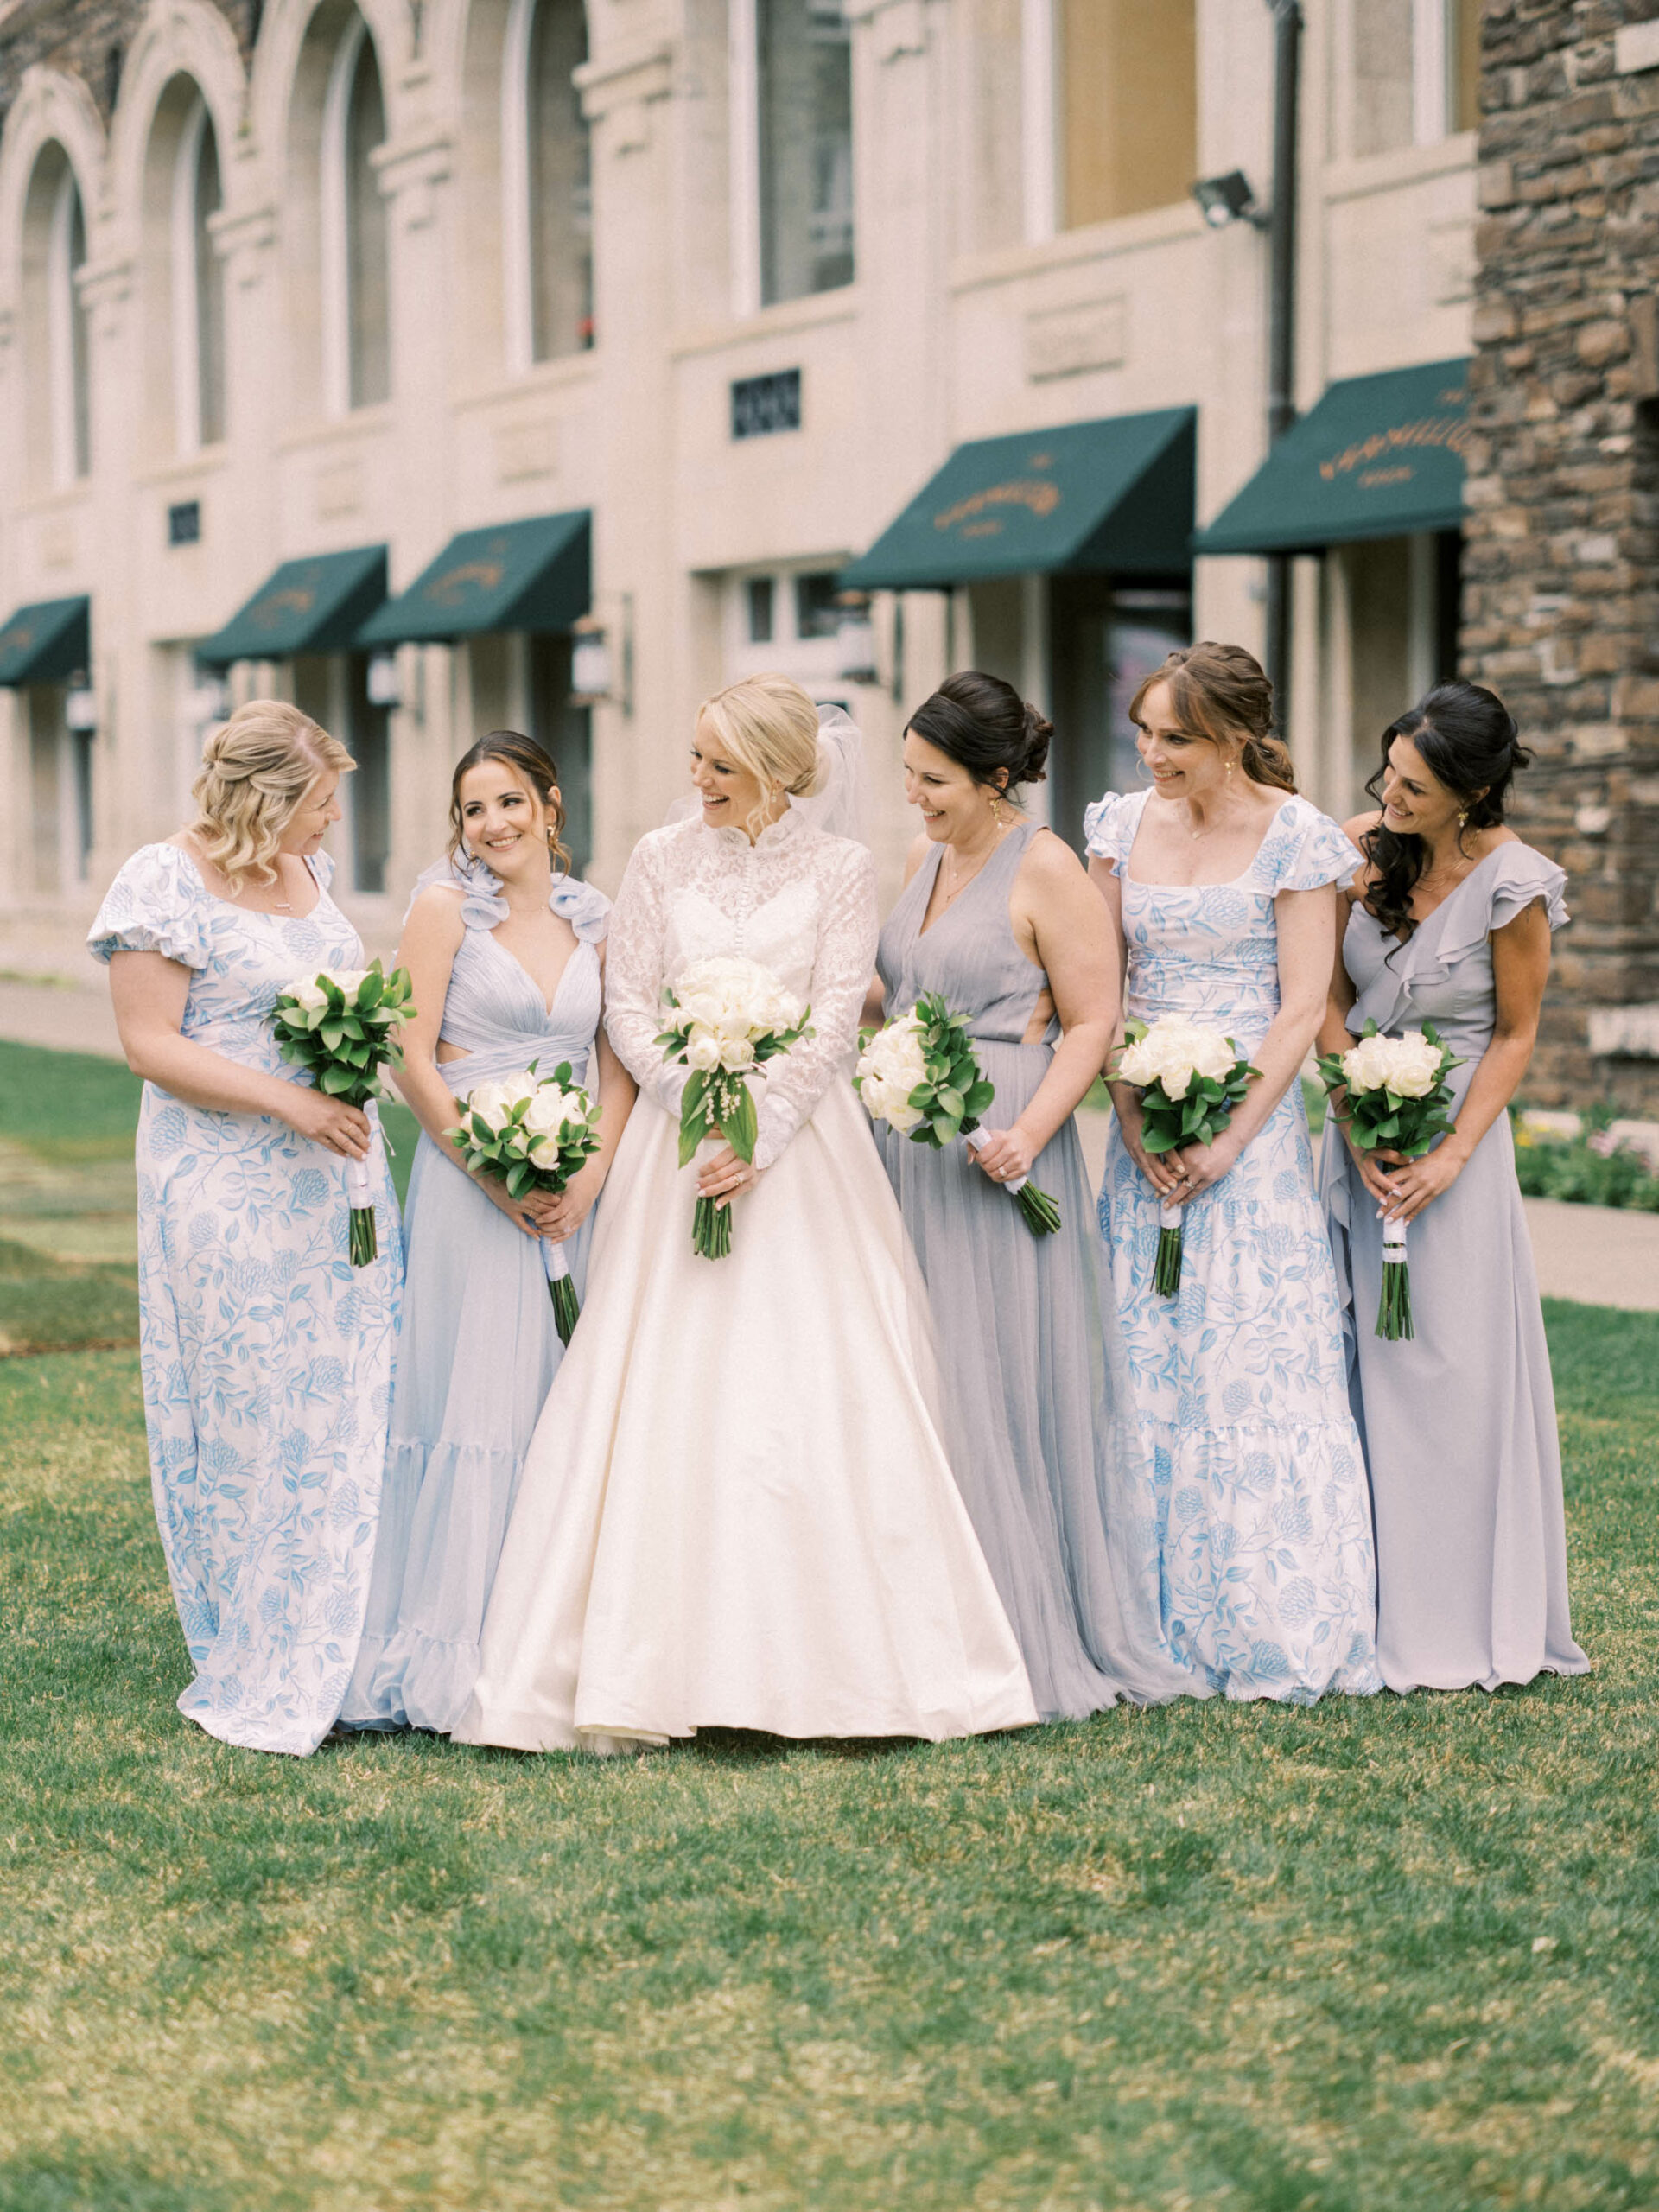 Can you hire a wedding photographer last minute?